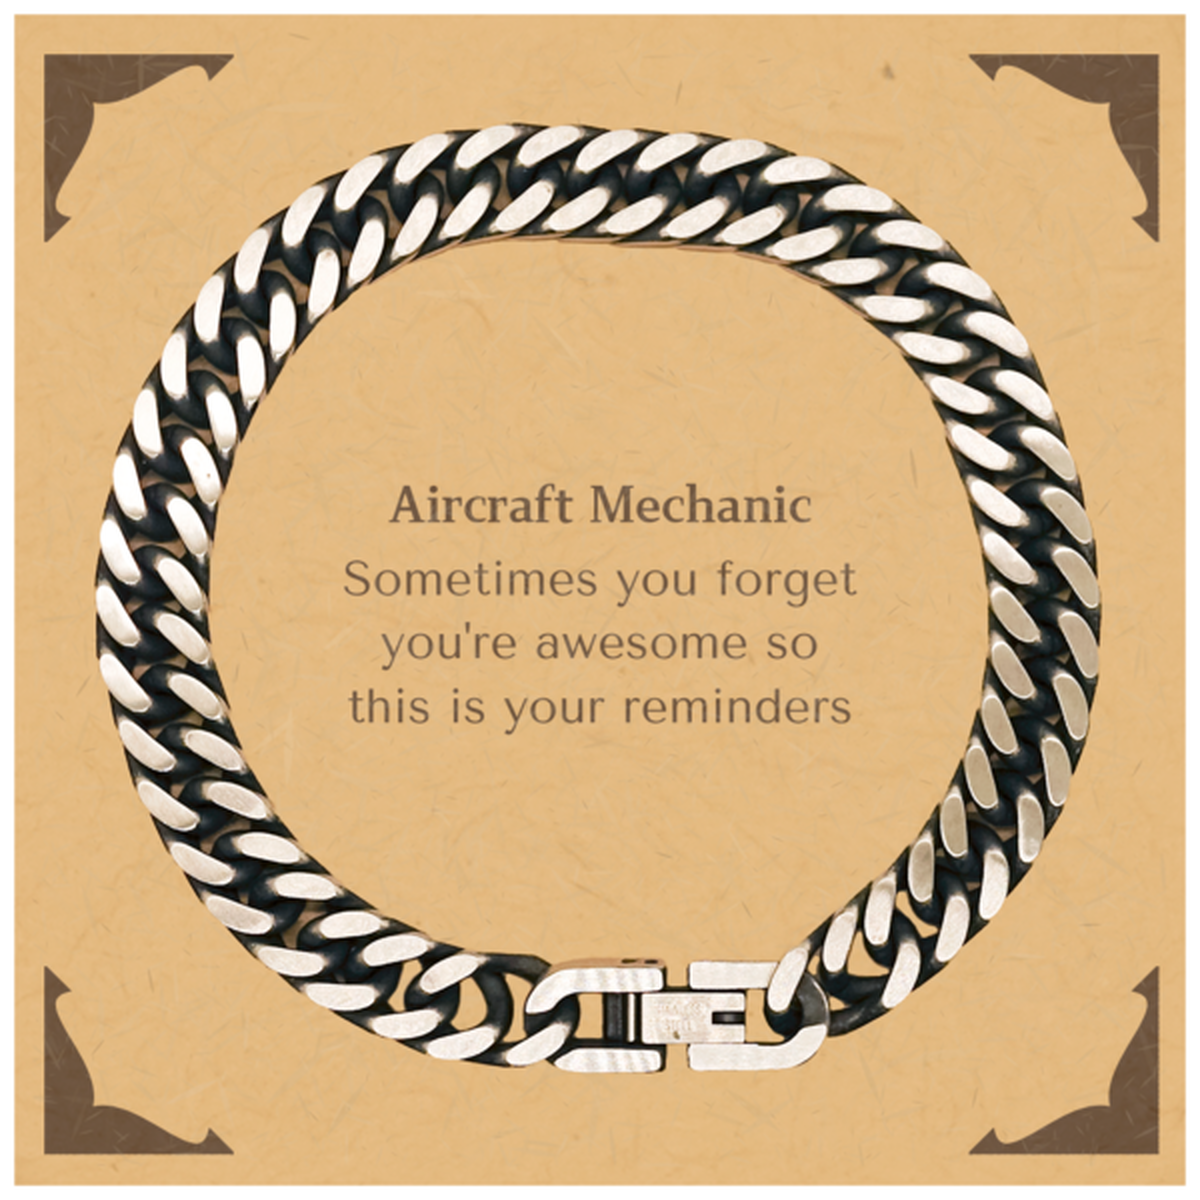 Sentimental Aircraft Mechanic Cuban Link Chain Bracelet, Aircraft Mechanic Sometimes you forget you're awesome so this is your reminders, Graduation Christmas Birthday Gifts for Aircraft Mechanic, Men, Women, Coworkers